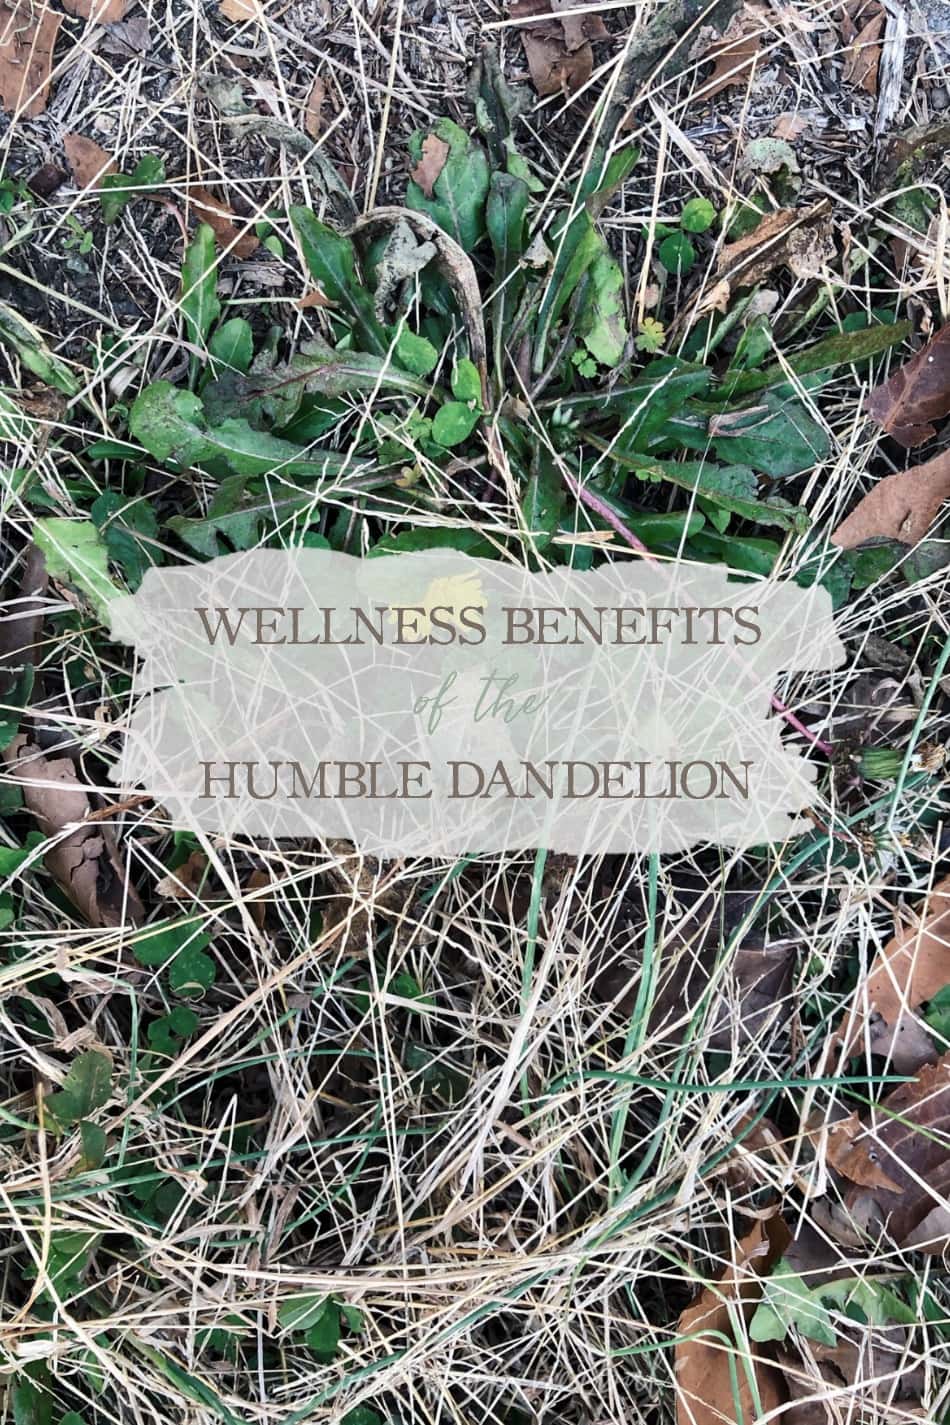 Wellness Benefits of the Humble Dandelion | Growing Up Herbal | All parts of dandelion are edible and nutritious. Come learn a bit about dandlion wellness benefits and how to incorporate it into your wellness routine!